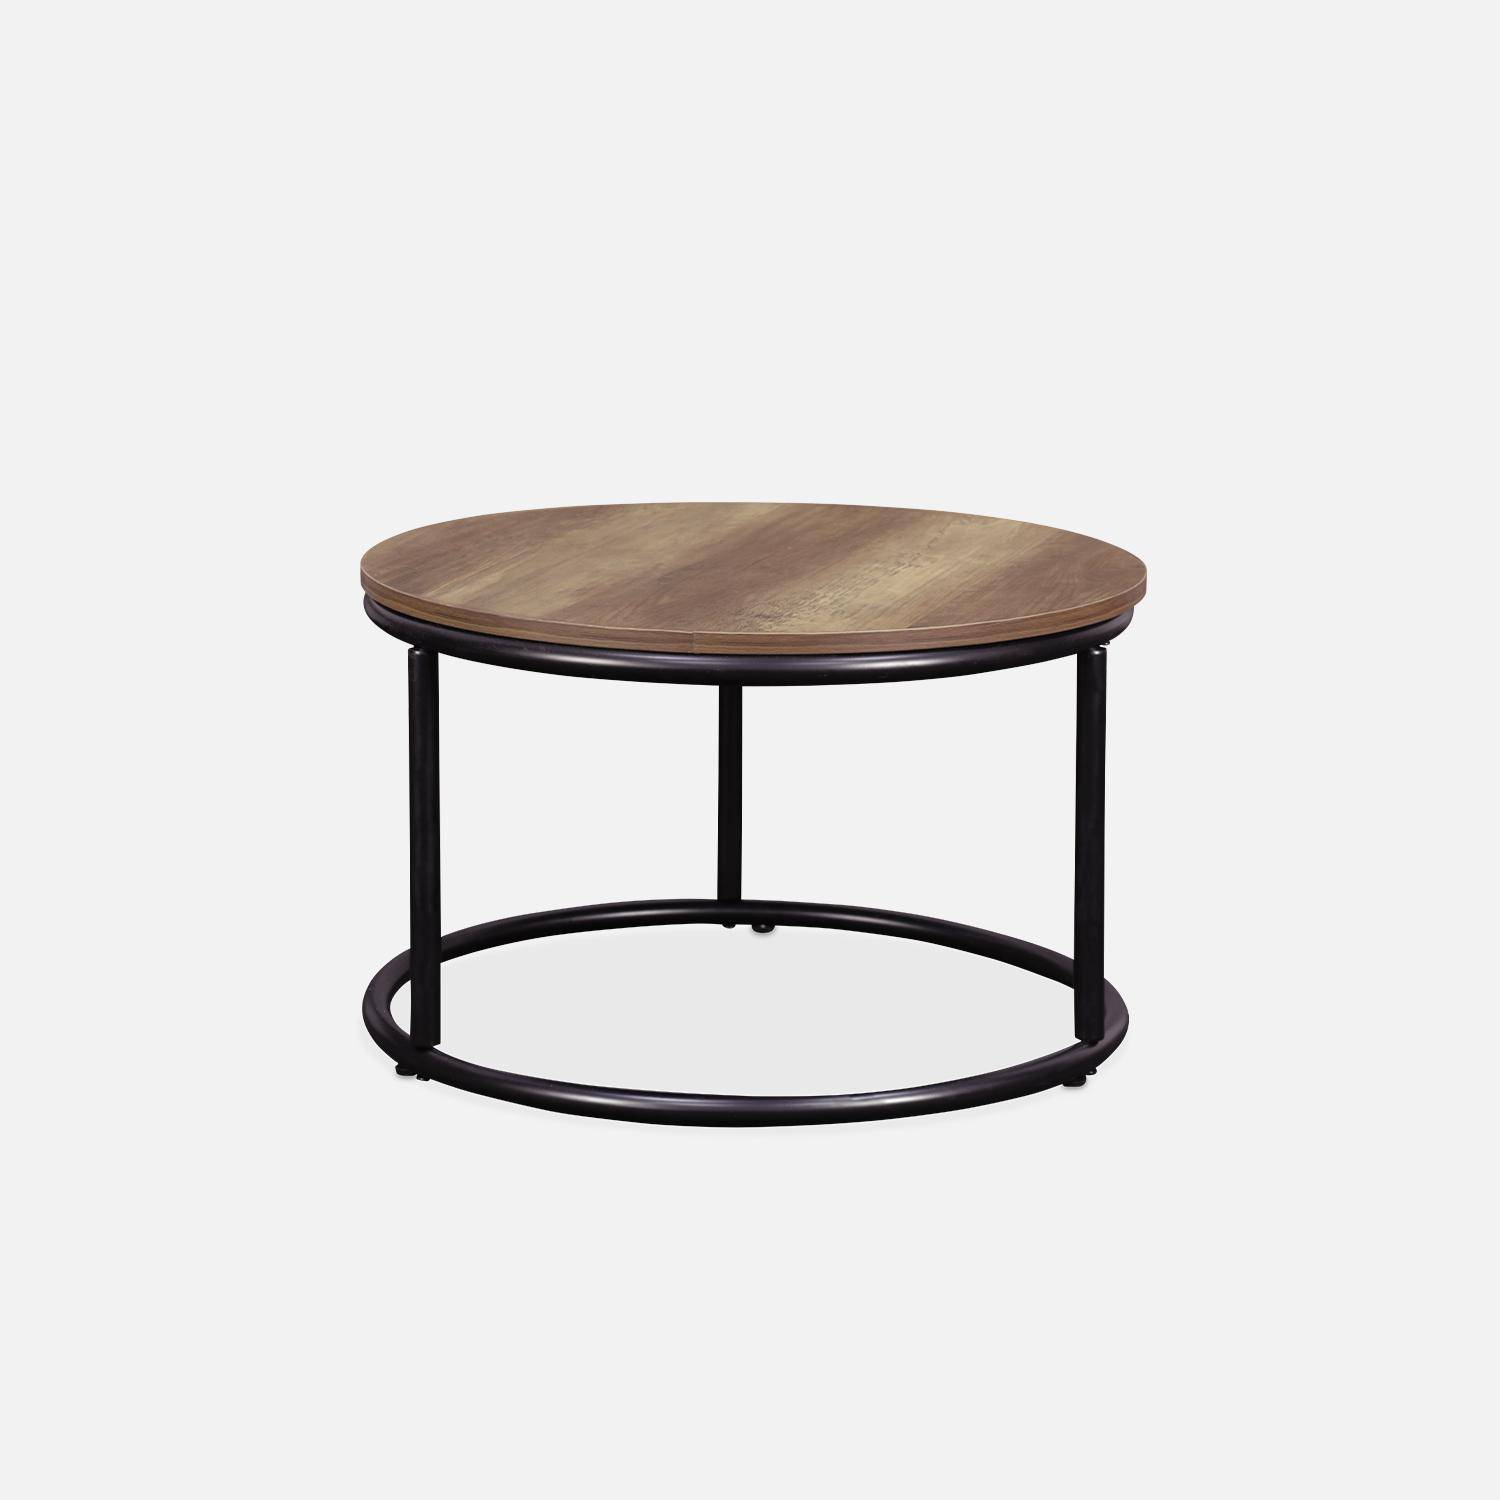 Pair of round, metal and wood-effect nesting coffee tables, 77x40x57cm - Loft Photo6